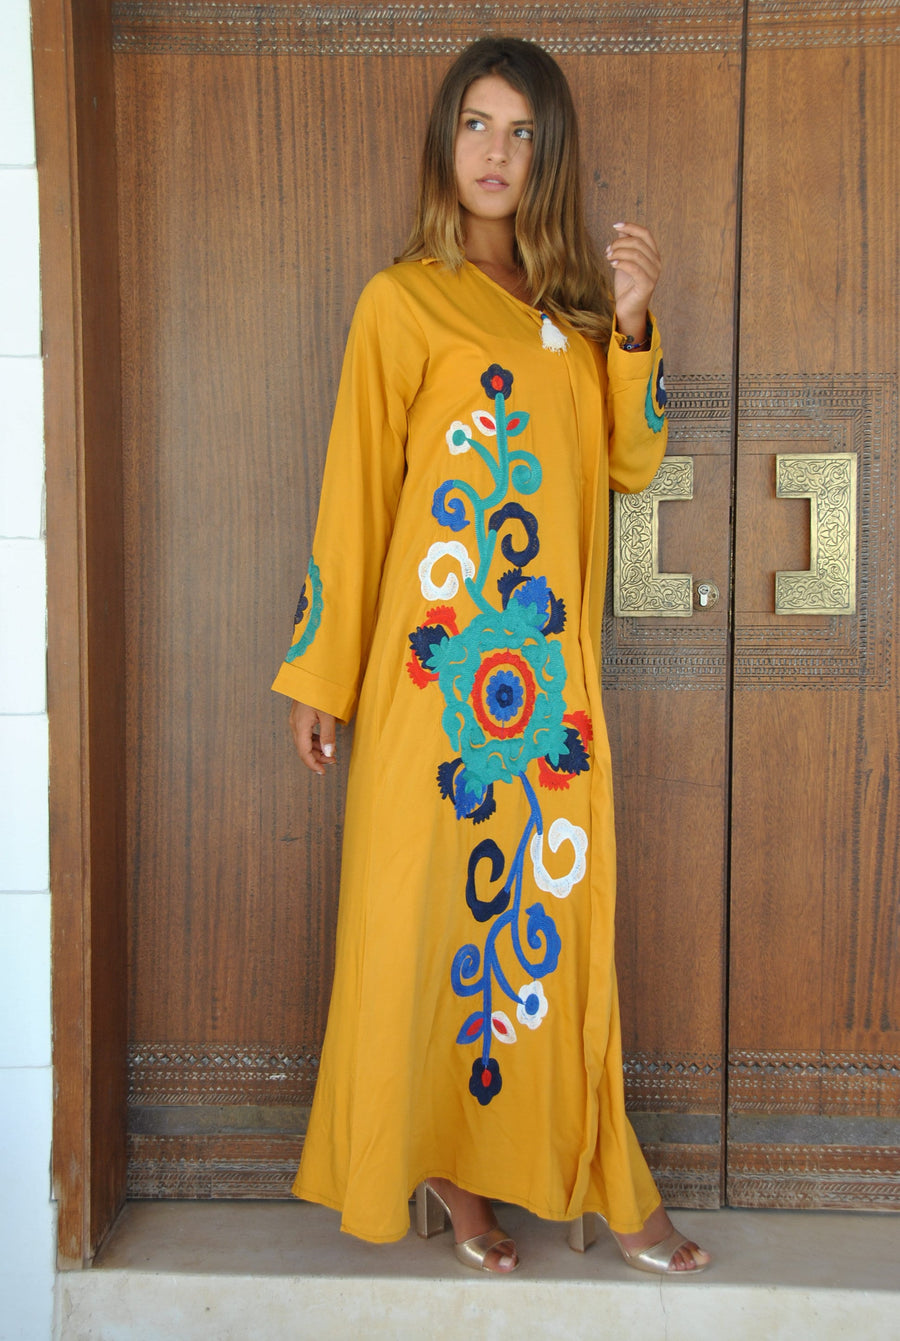 Mustard yellow flower embroidered Caftan, summer caftan, Caftans for women, embroidered Caftan dress, Caftan maxi dress, Cotton Caftans